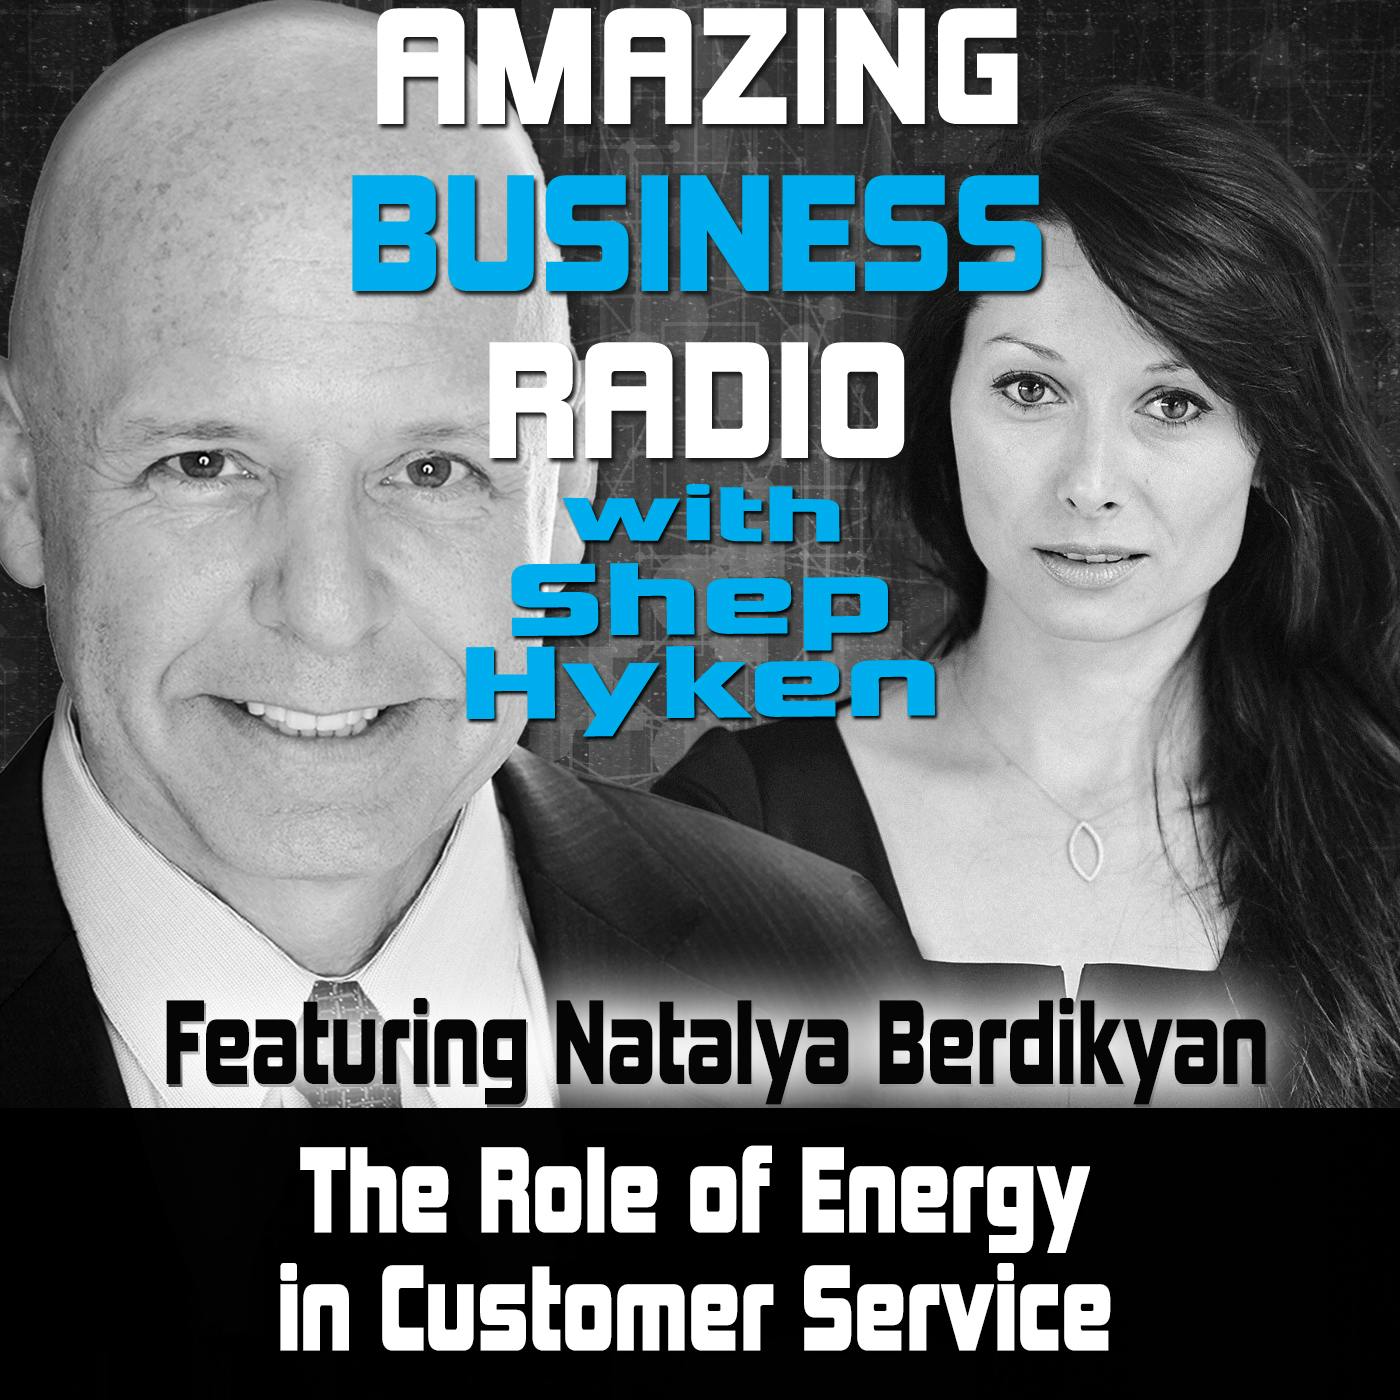 Understanding How the 7 Levels of Energy Affects Customer Service featuring Natalya Berdikyan